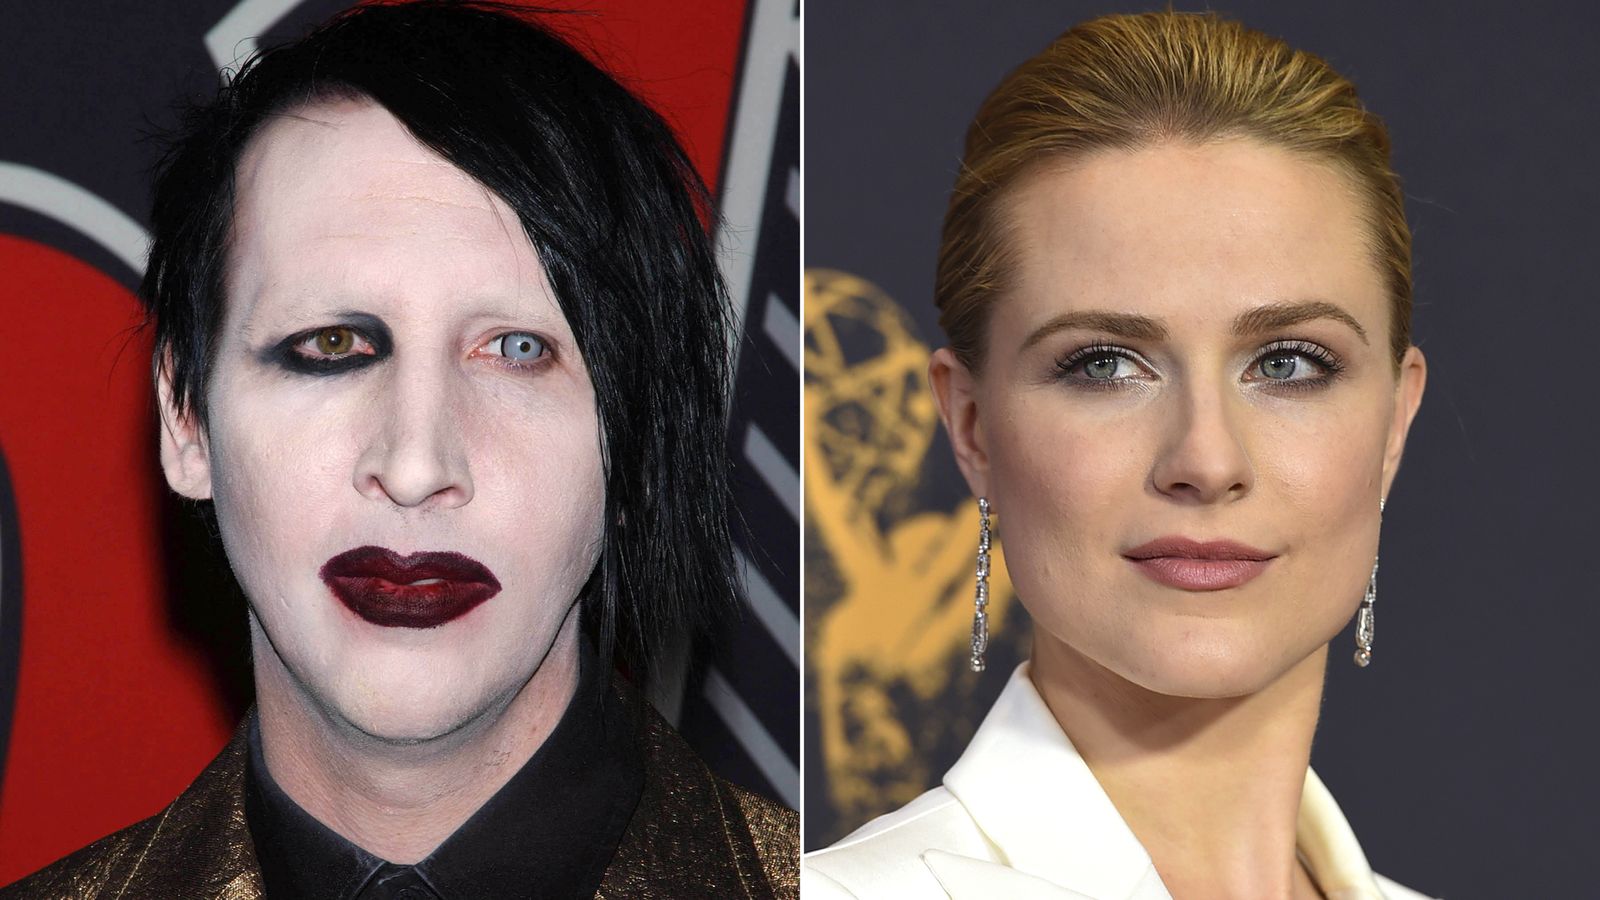 Marilyn Manson sues Evan Rachel Wood, saying actress cast him as a rapist and abuser Ents and Arts News Sky News pic